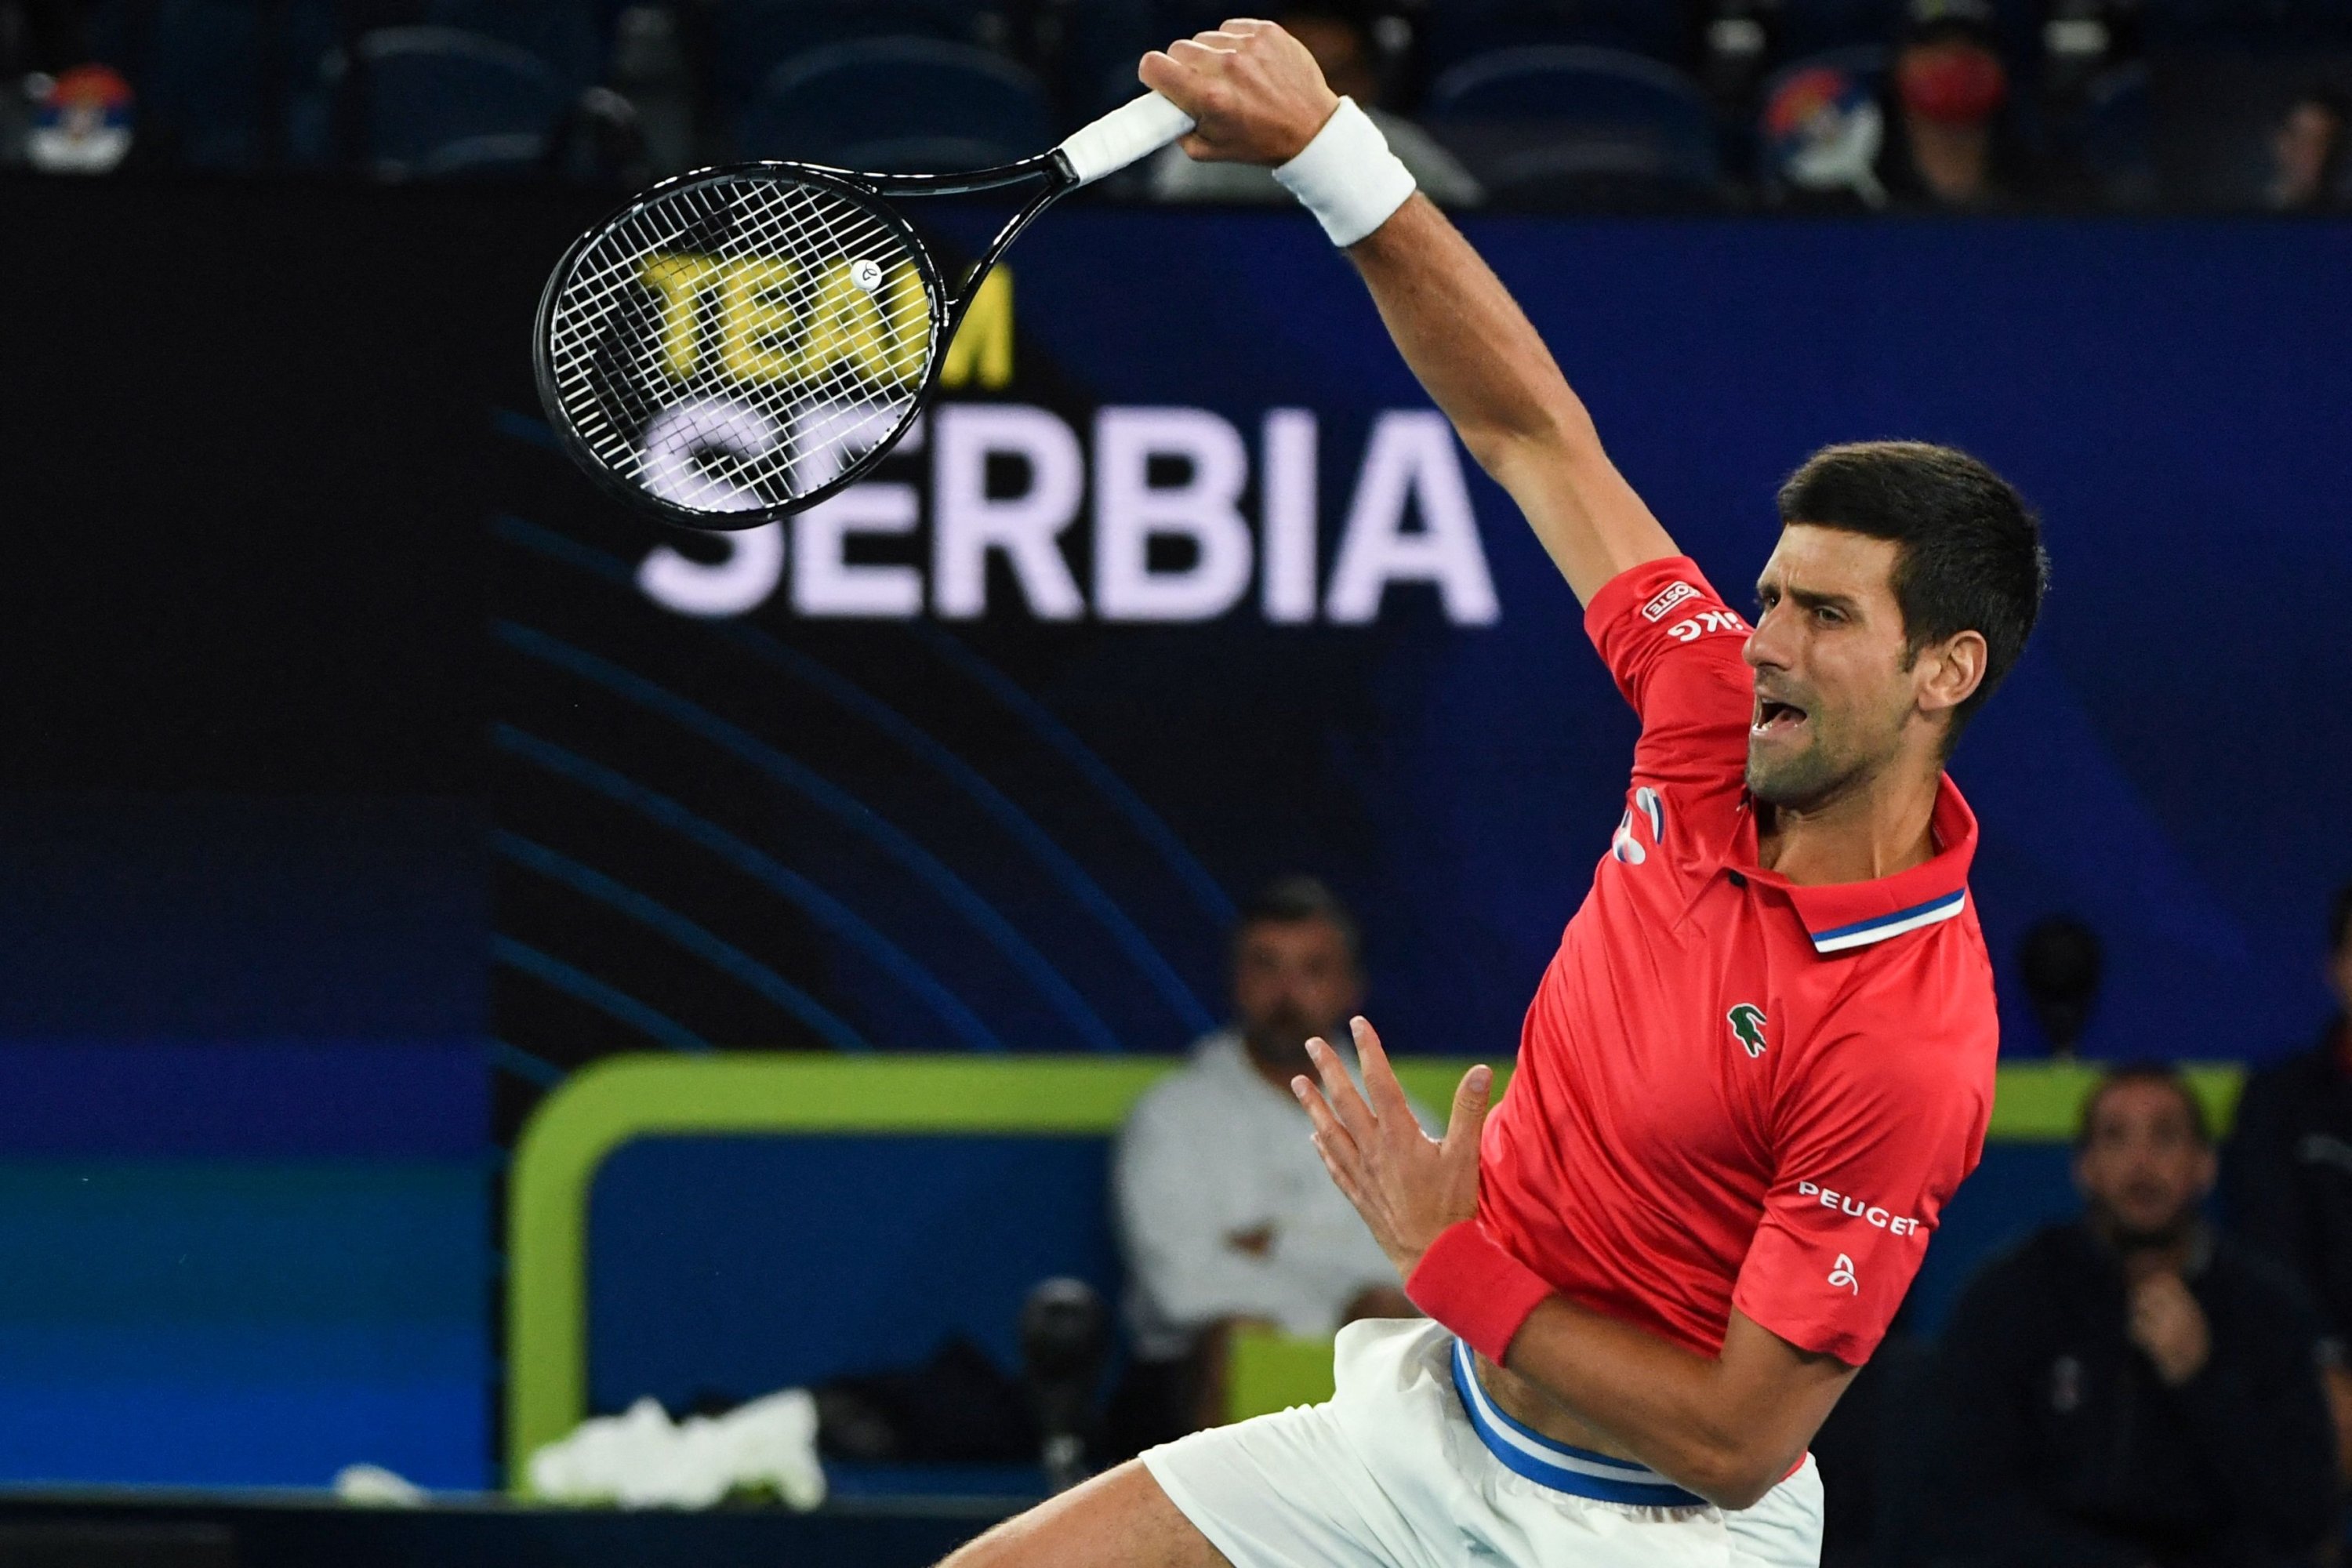 Serbia includes Djokovic for Sydney ATP Cup lineup | Daily Sabah